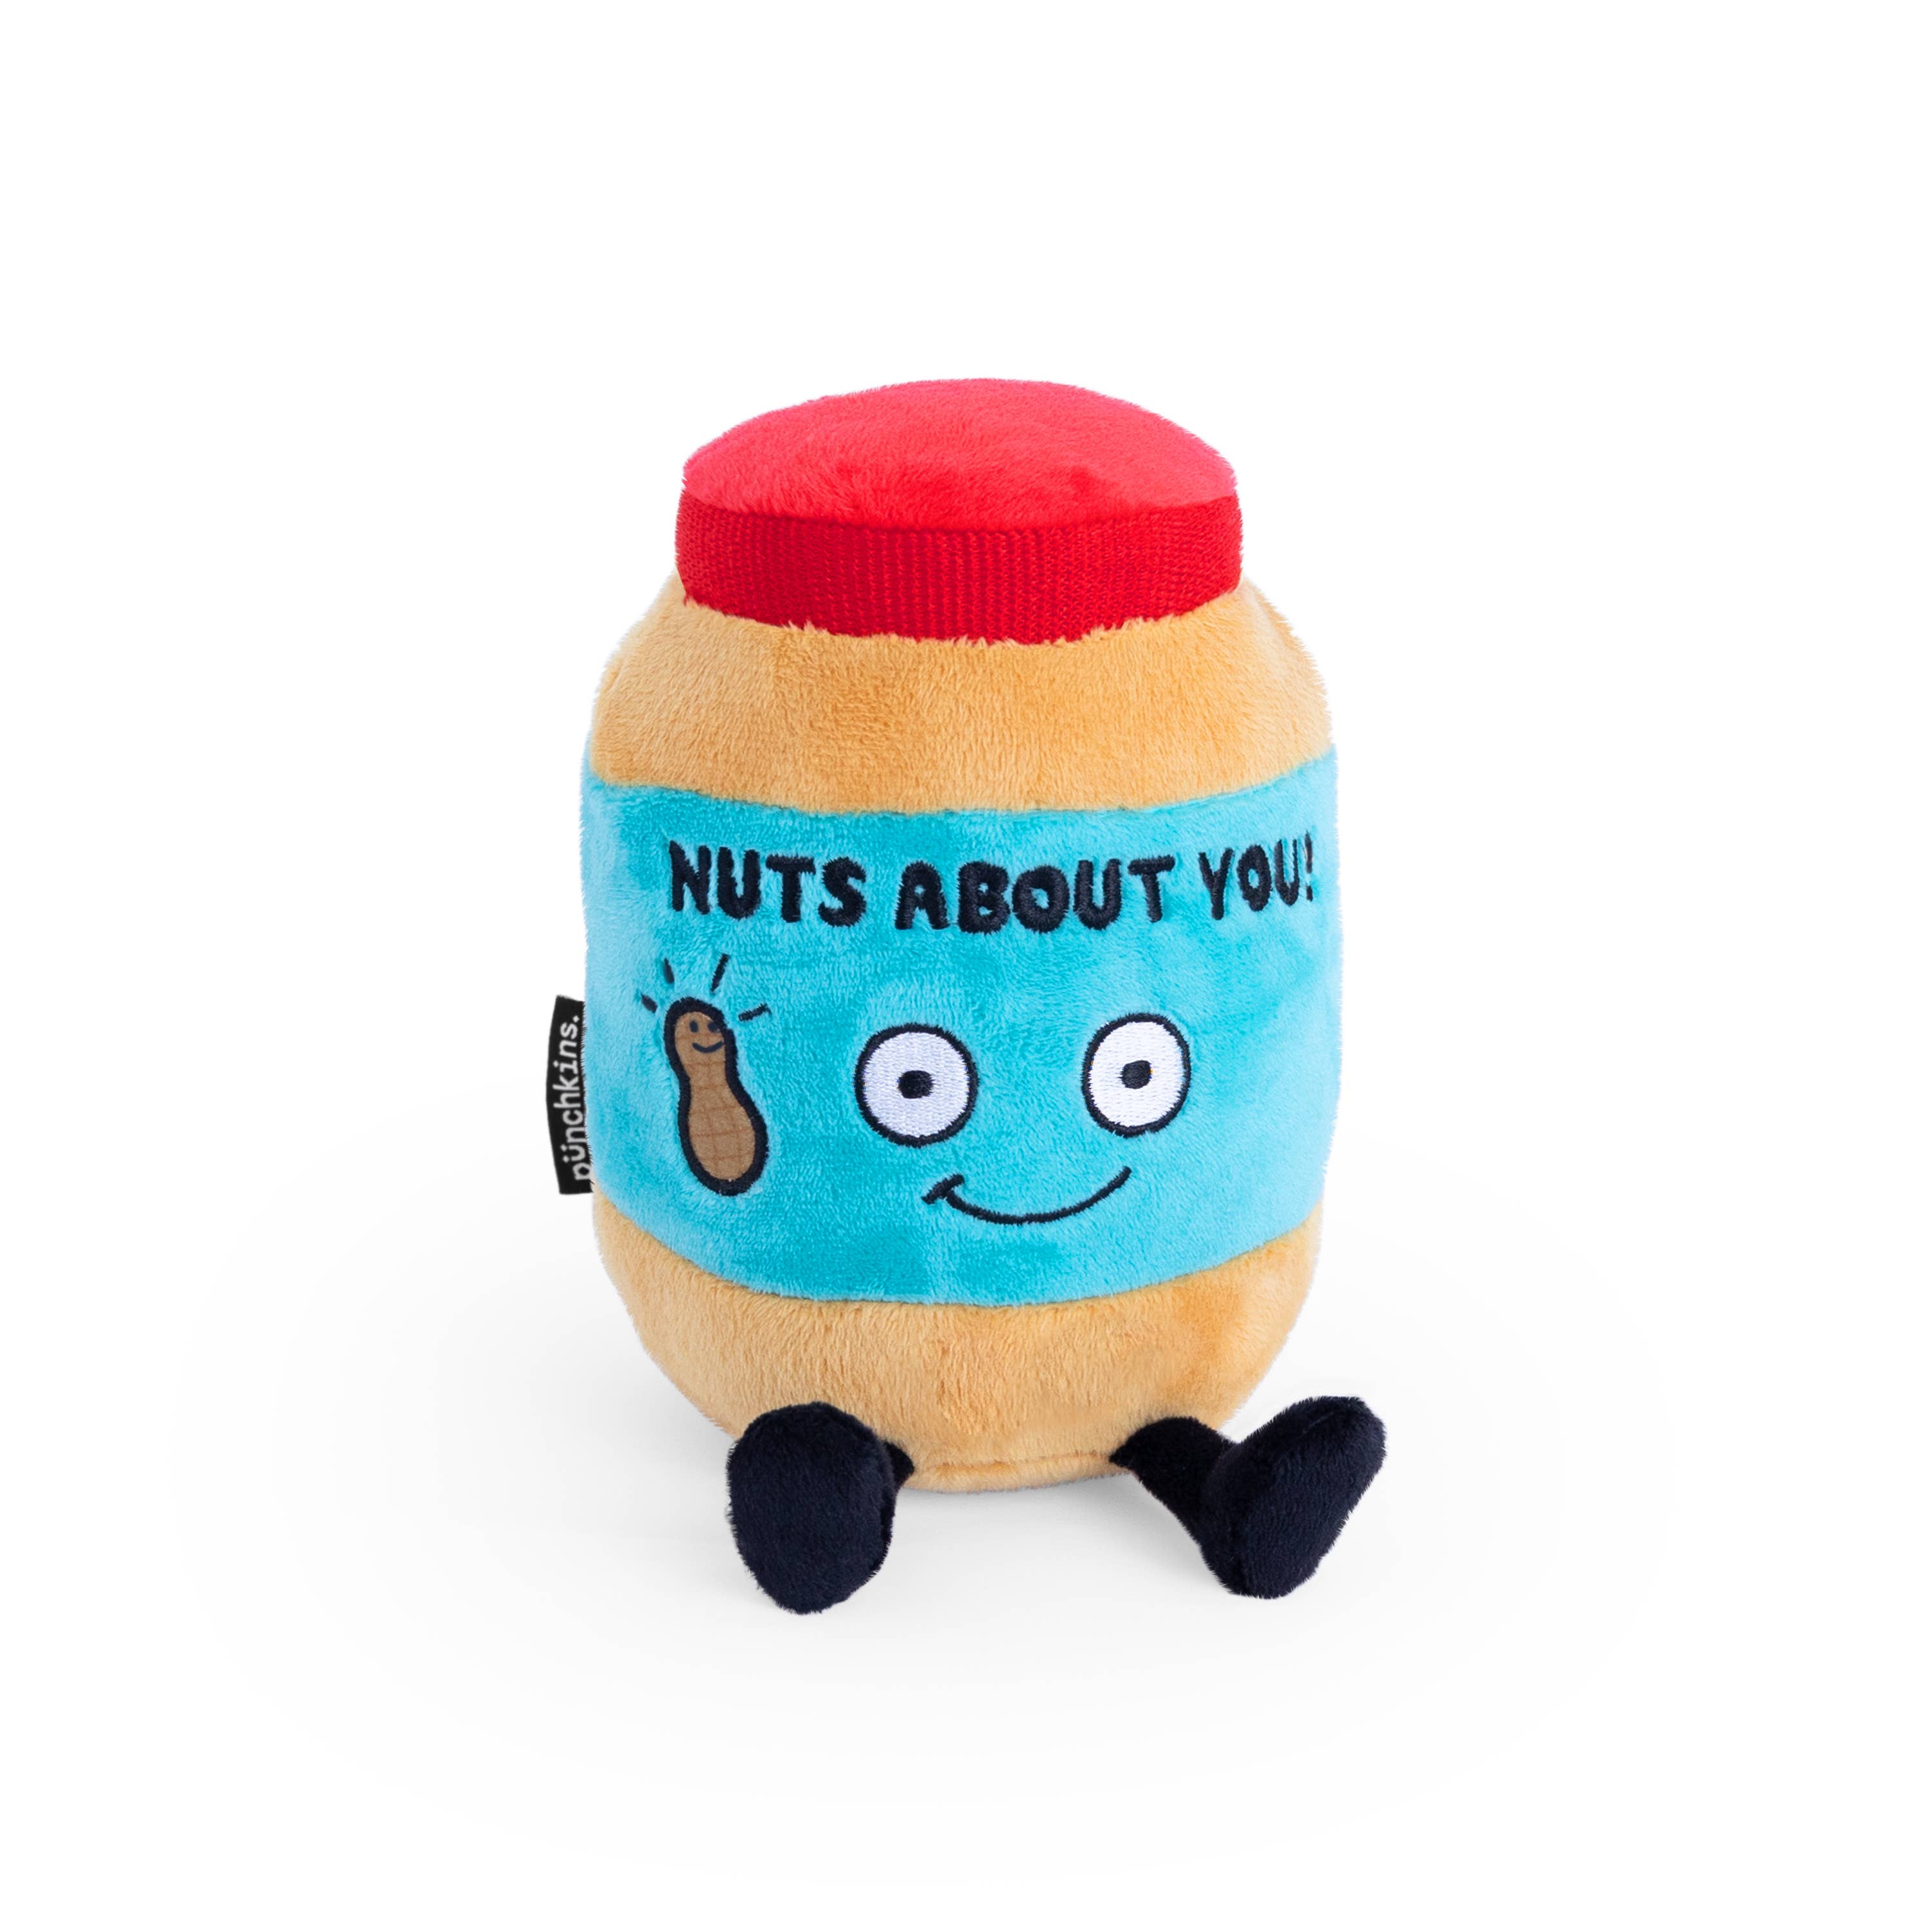 Punchkins "Nuts About You" Plush Jar of Peanut Butter Kawaii Gifts